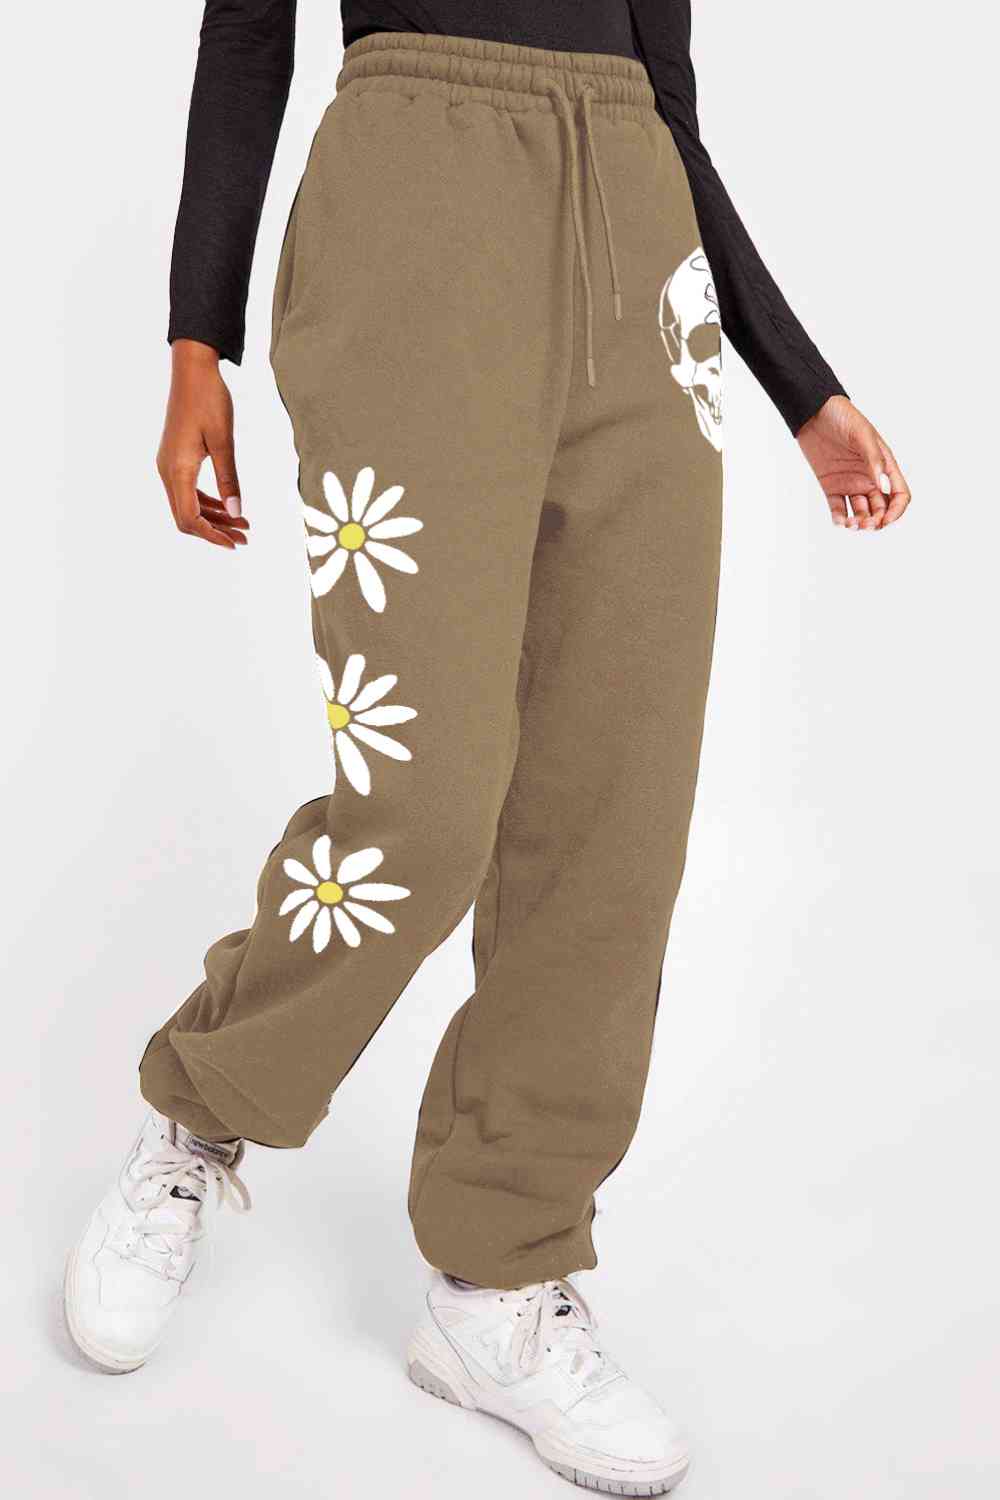 Simply Love Simply Love Full Size Drawstring Flower & Skull Graphic Long Sweatpants - GemThreads Boutique